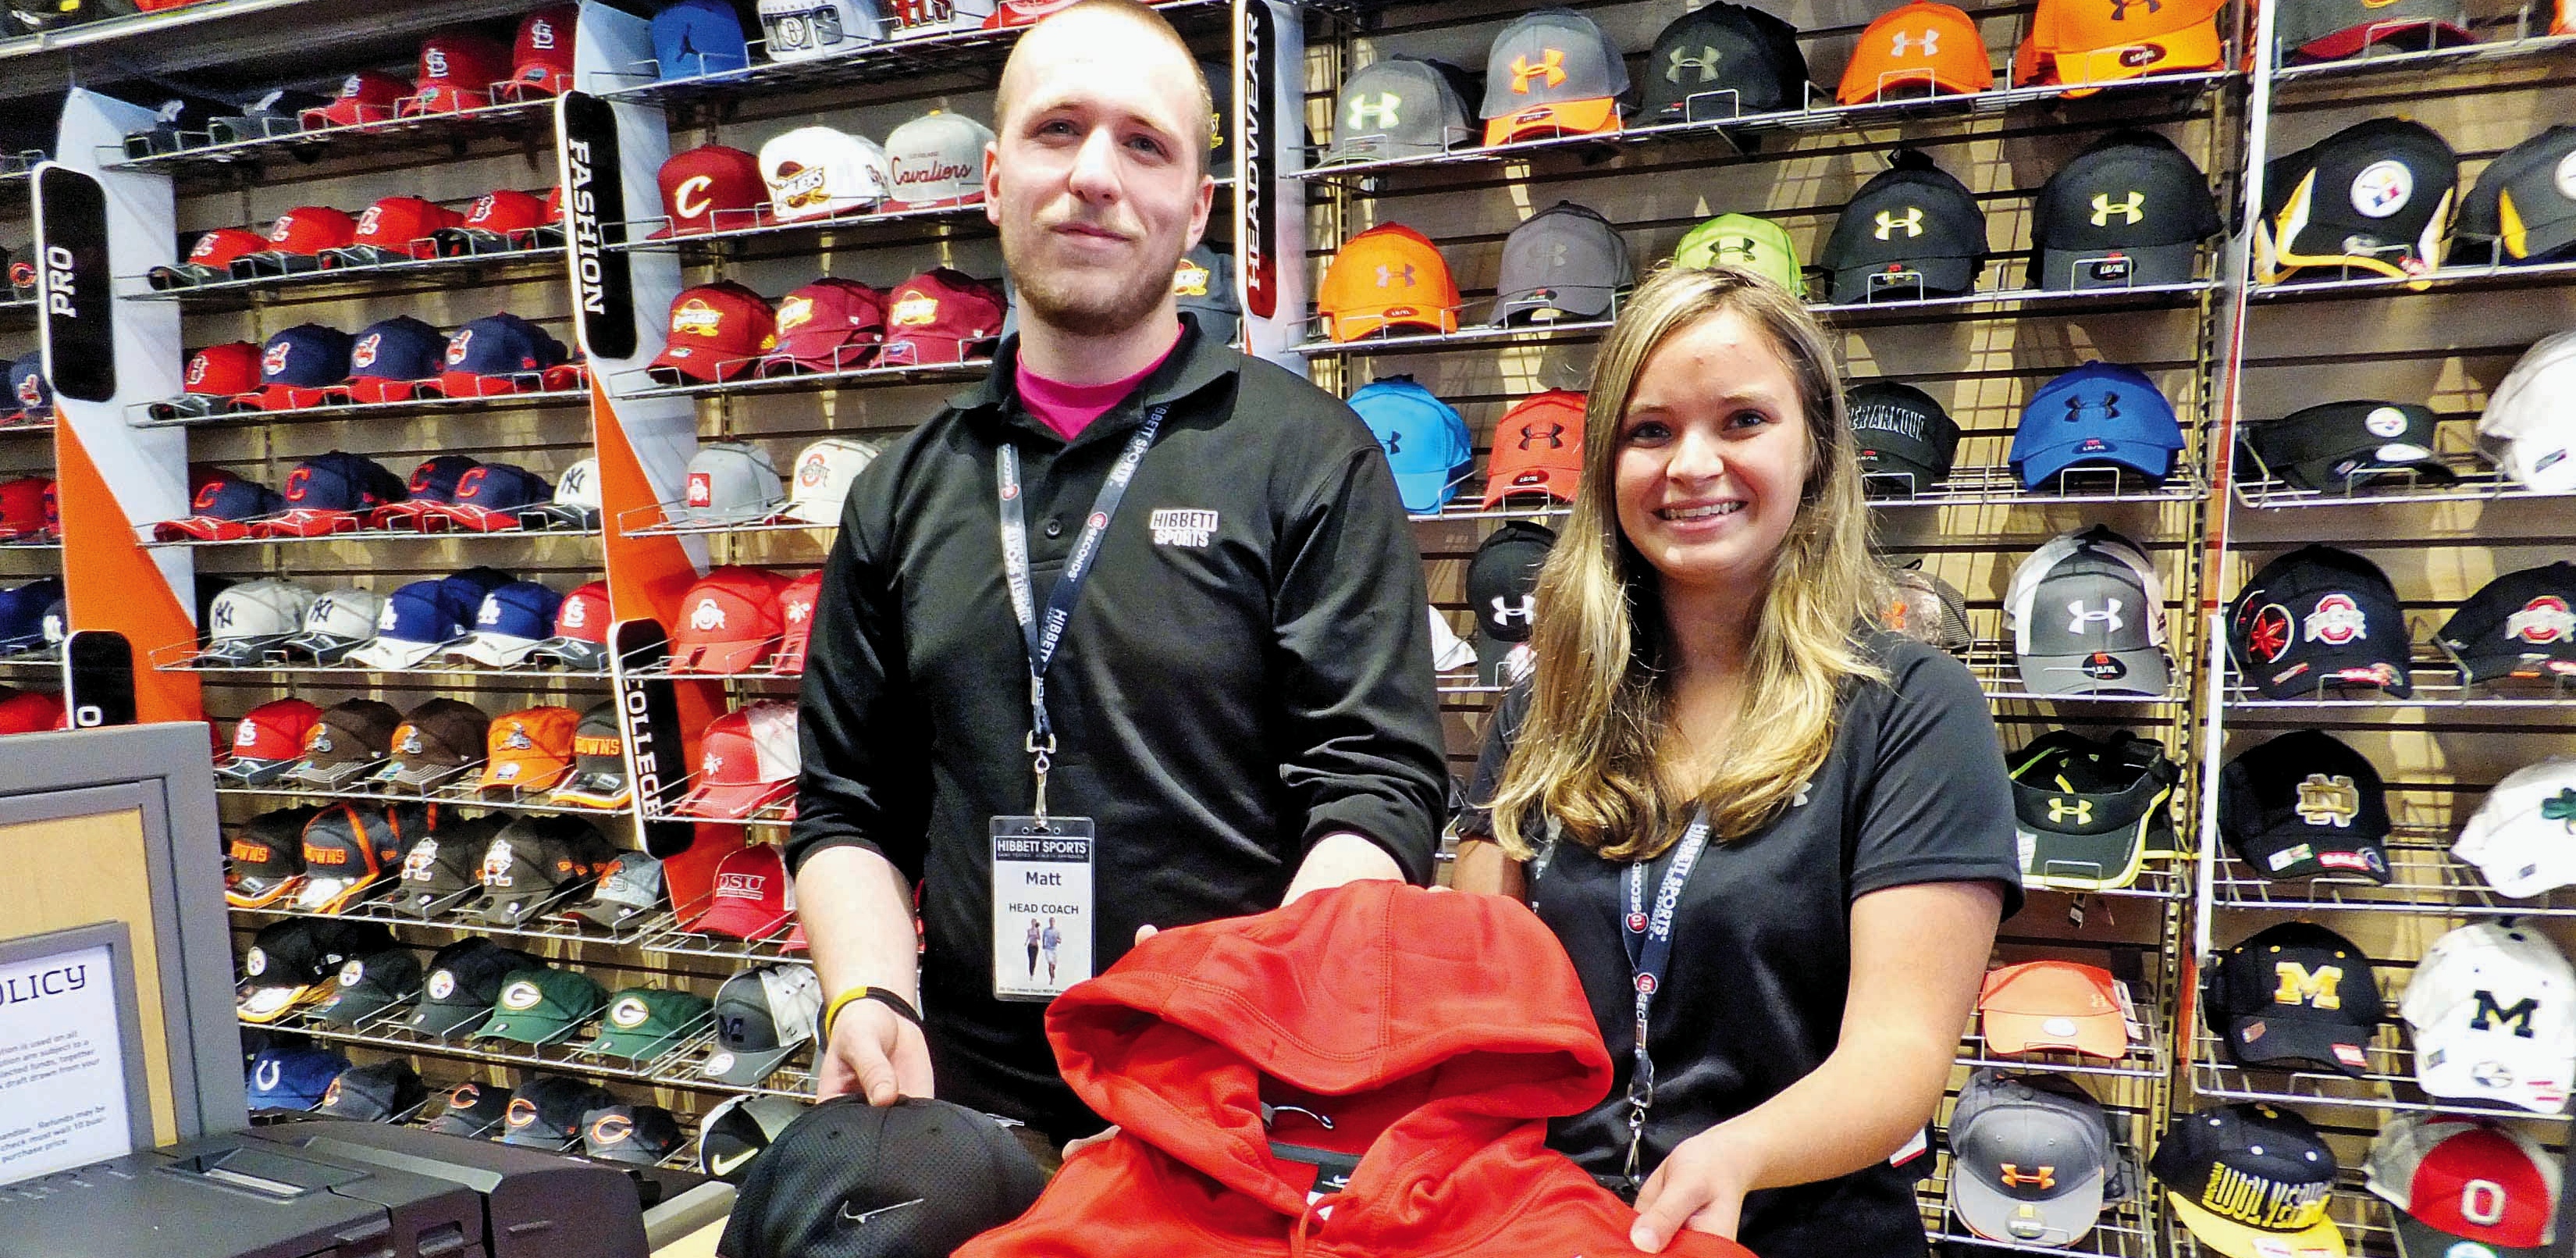 Chardon Store Caters to Fans of Fitness and Sports